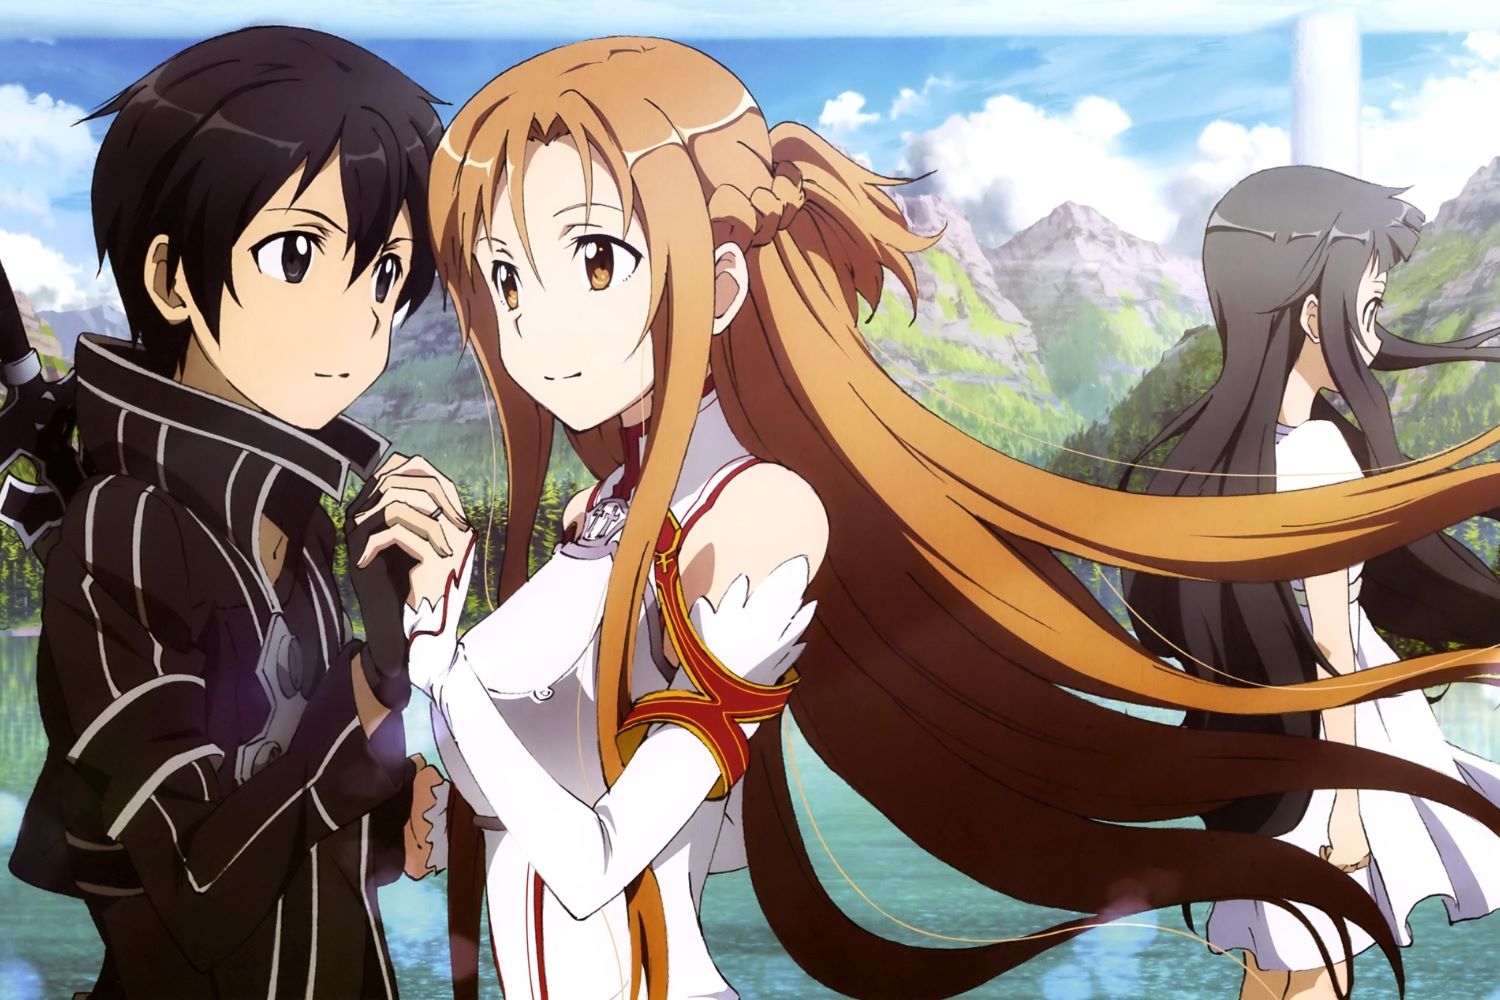 Kirito And Asuna: Are They Still Together?